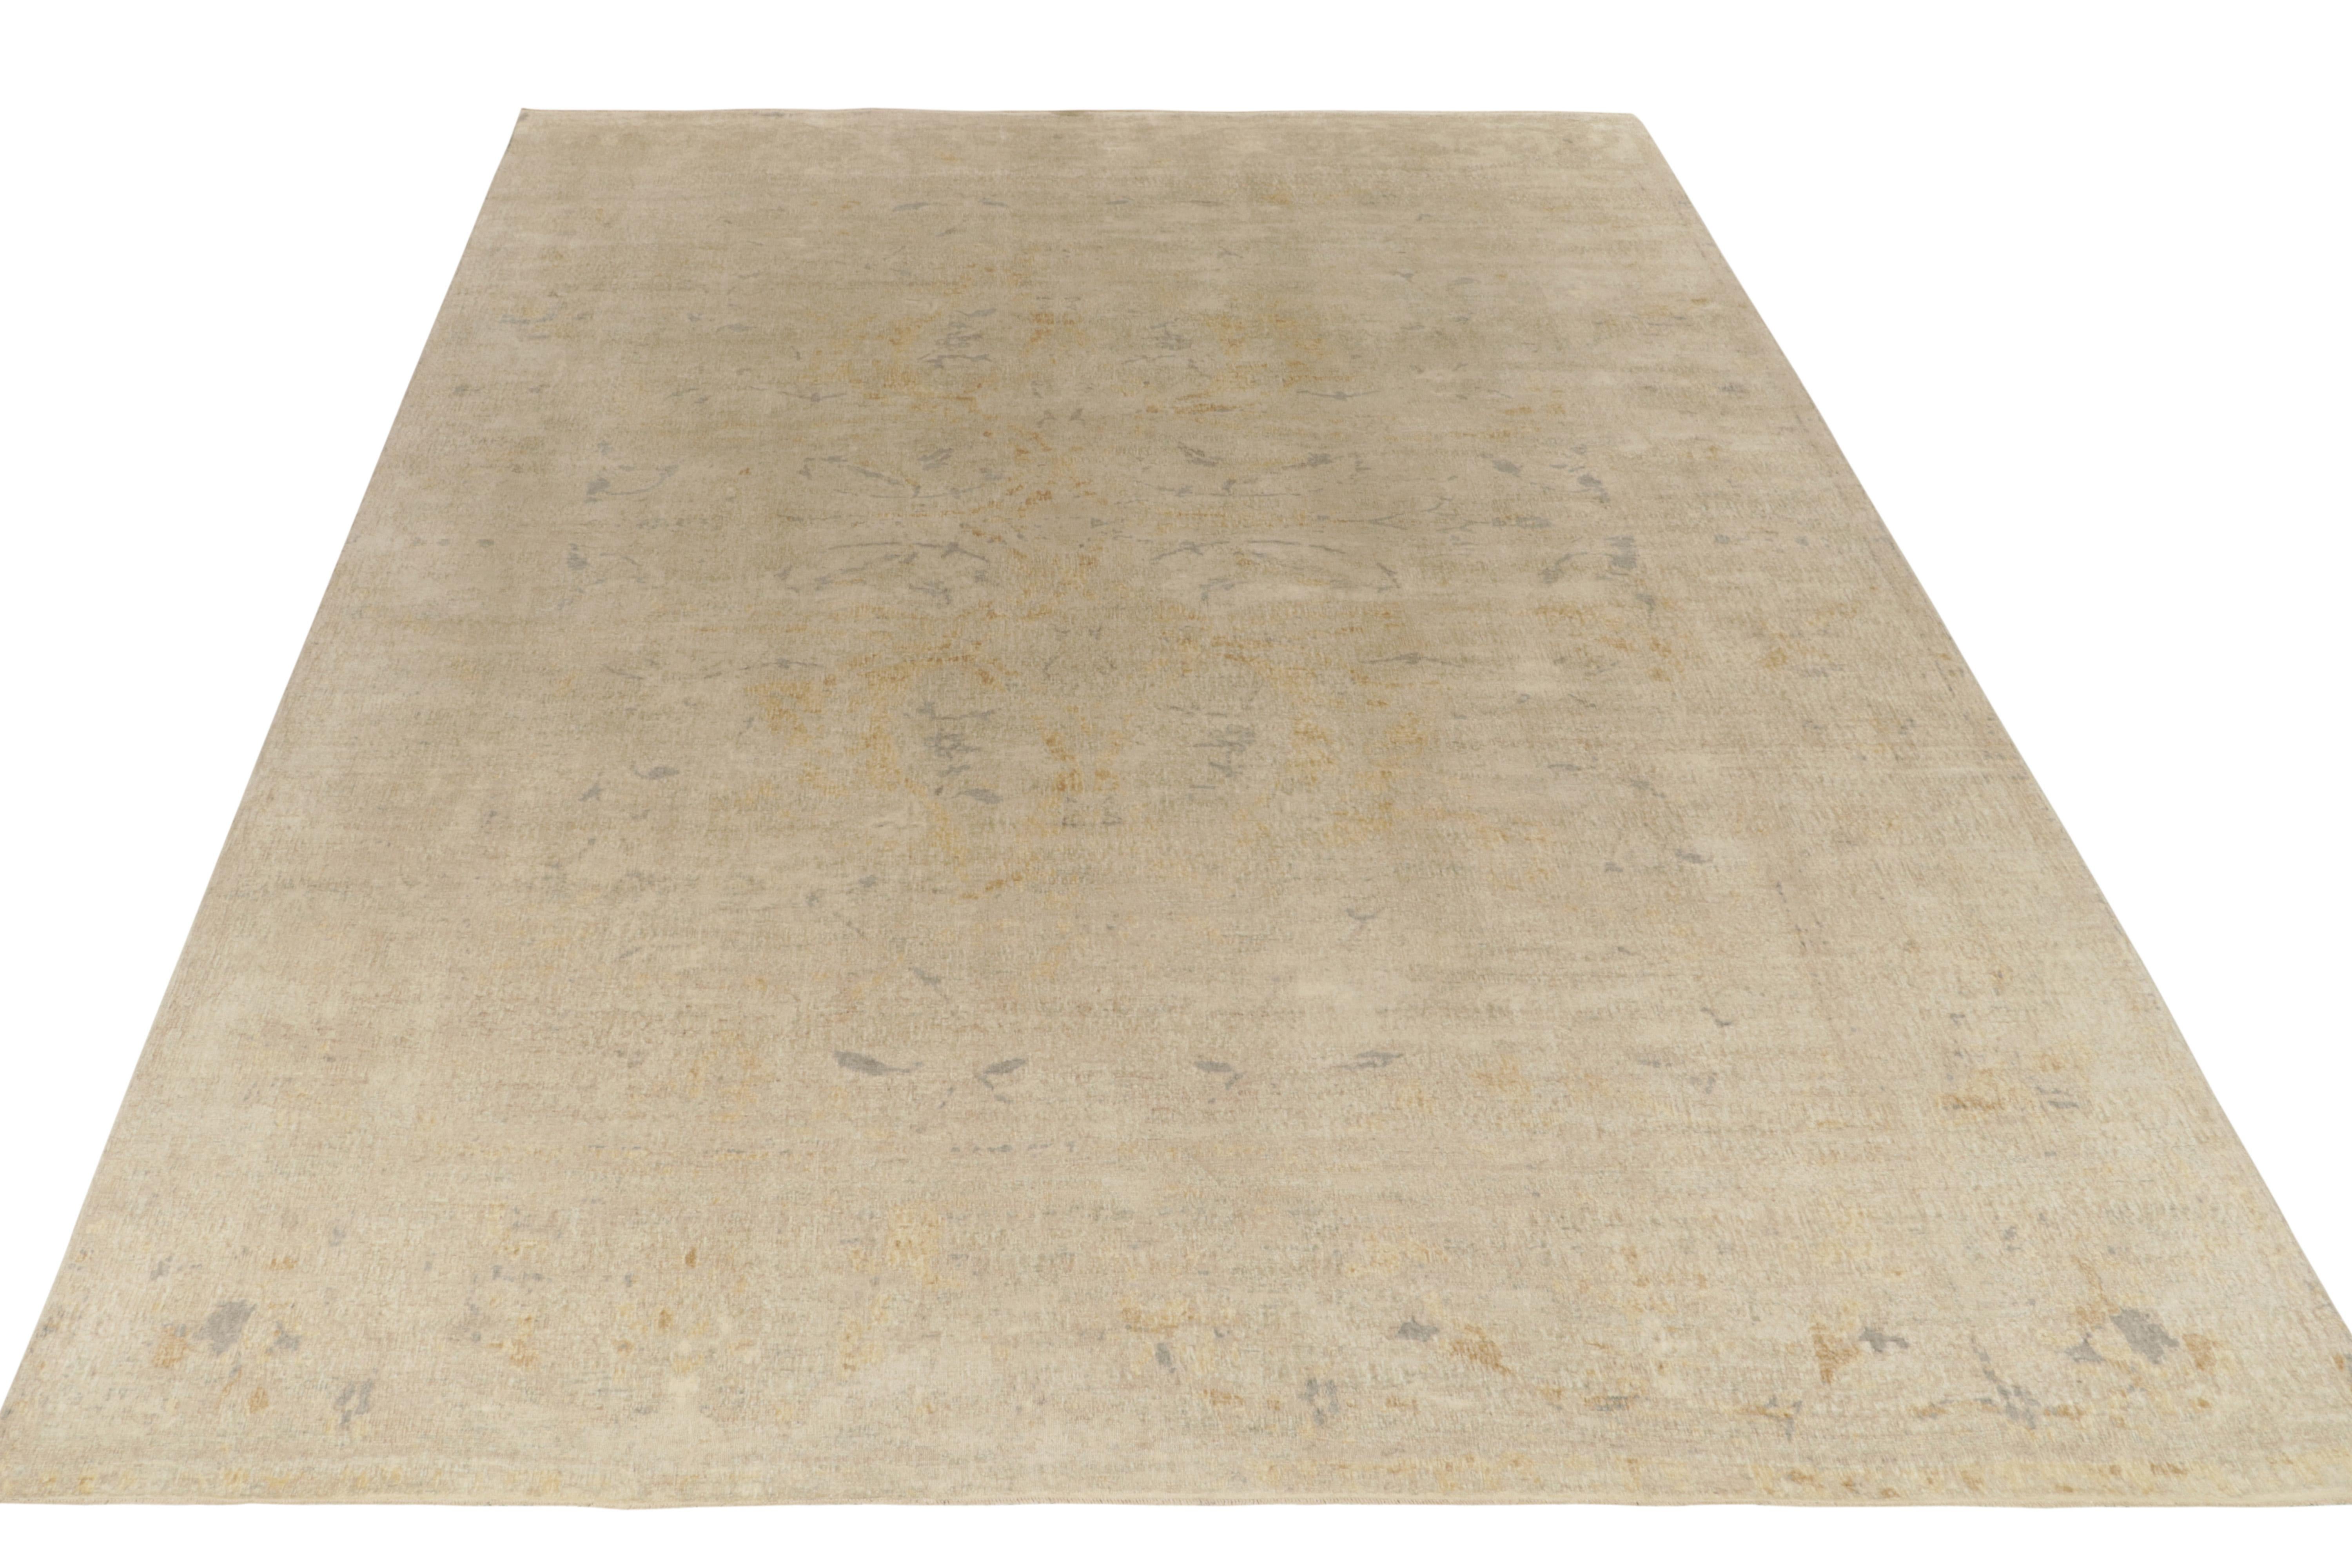 Hand knotted in quality wool, this 12x16 modern rug enjoys muted classic inspirations in tones of beige with gold and silver-gray accents. Seldom seen together in this subtle adaptation of a transitional style, an atypical colorway further